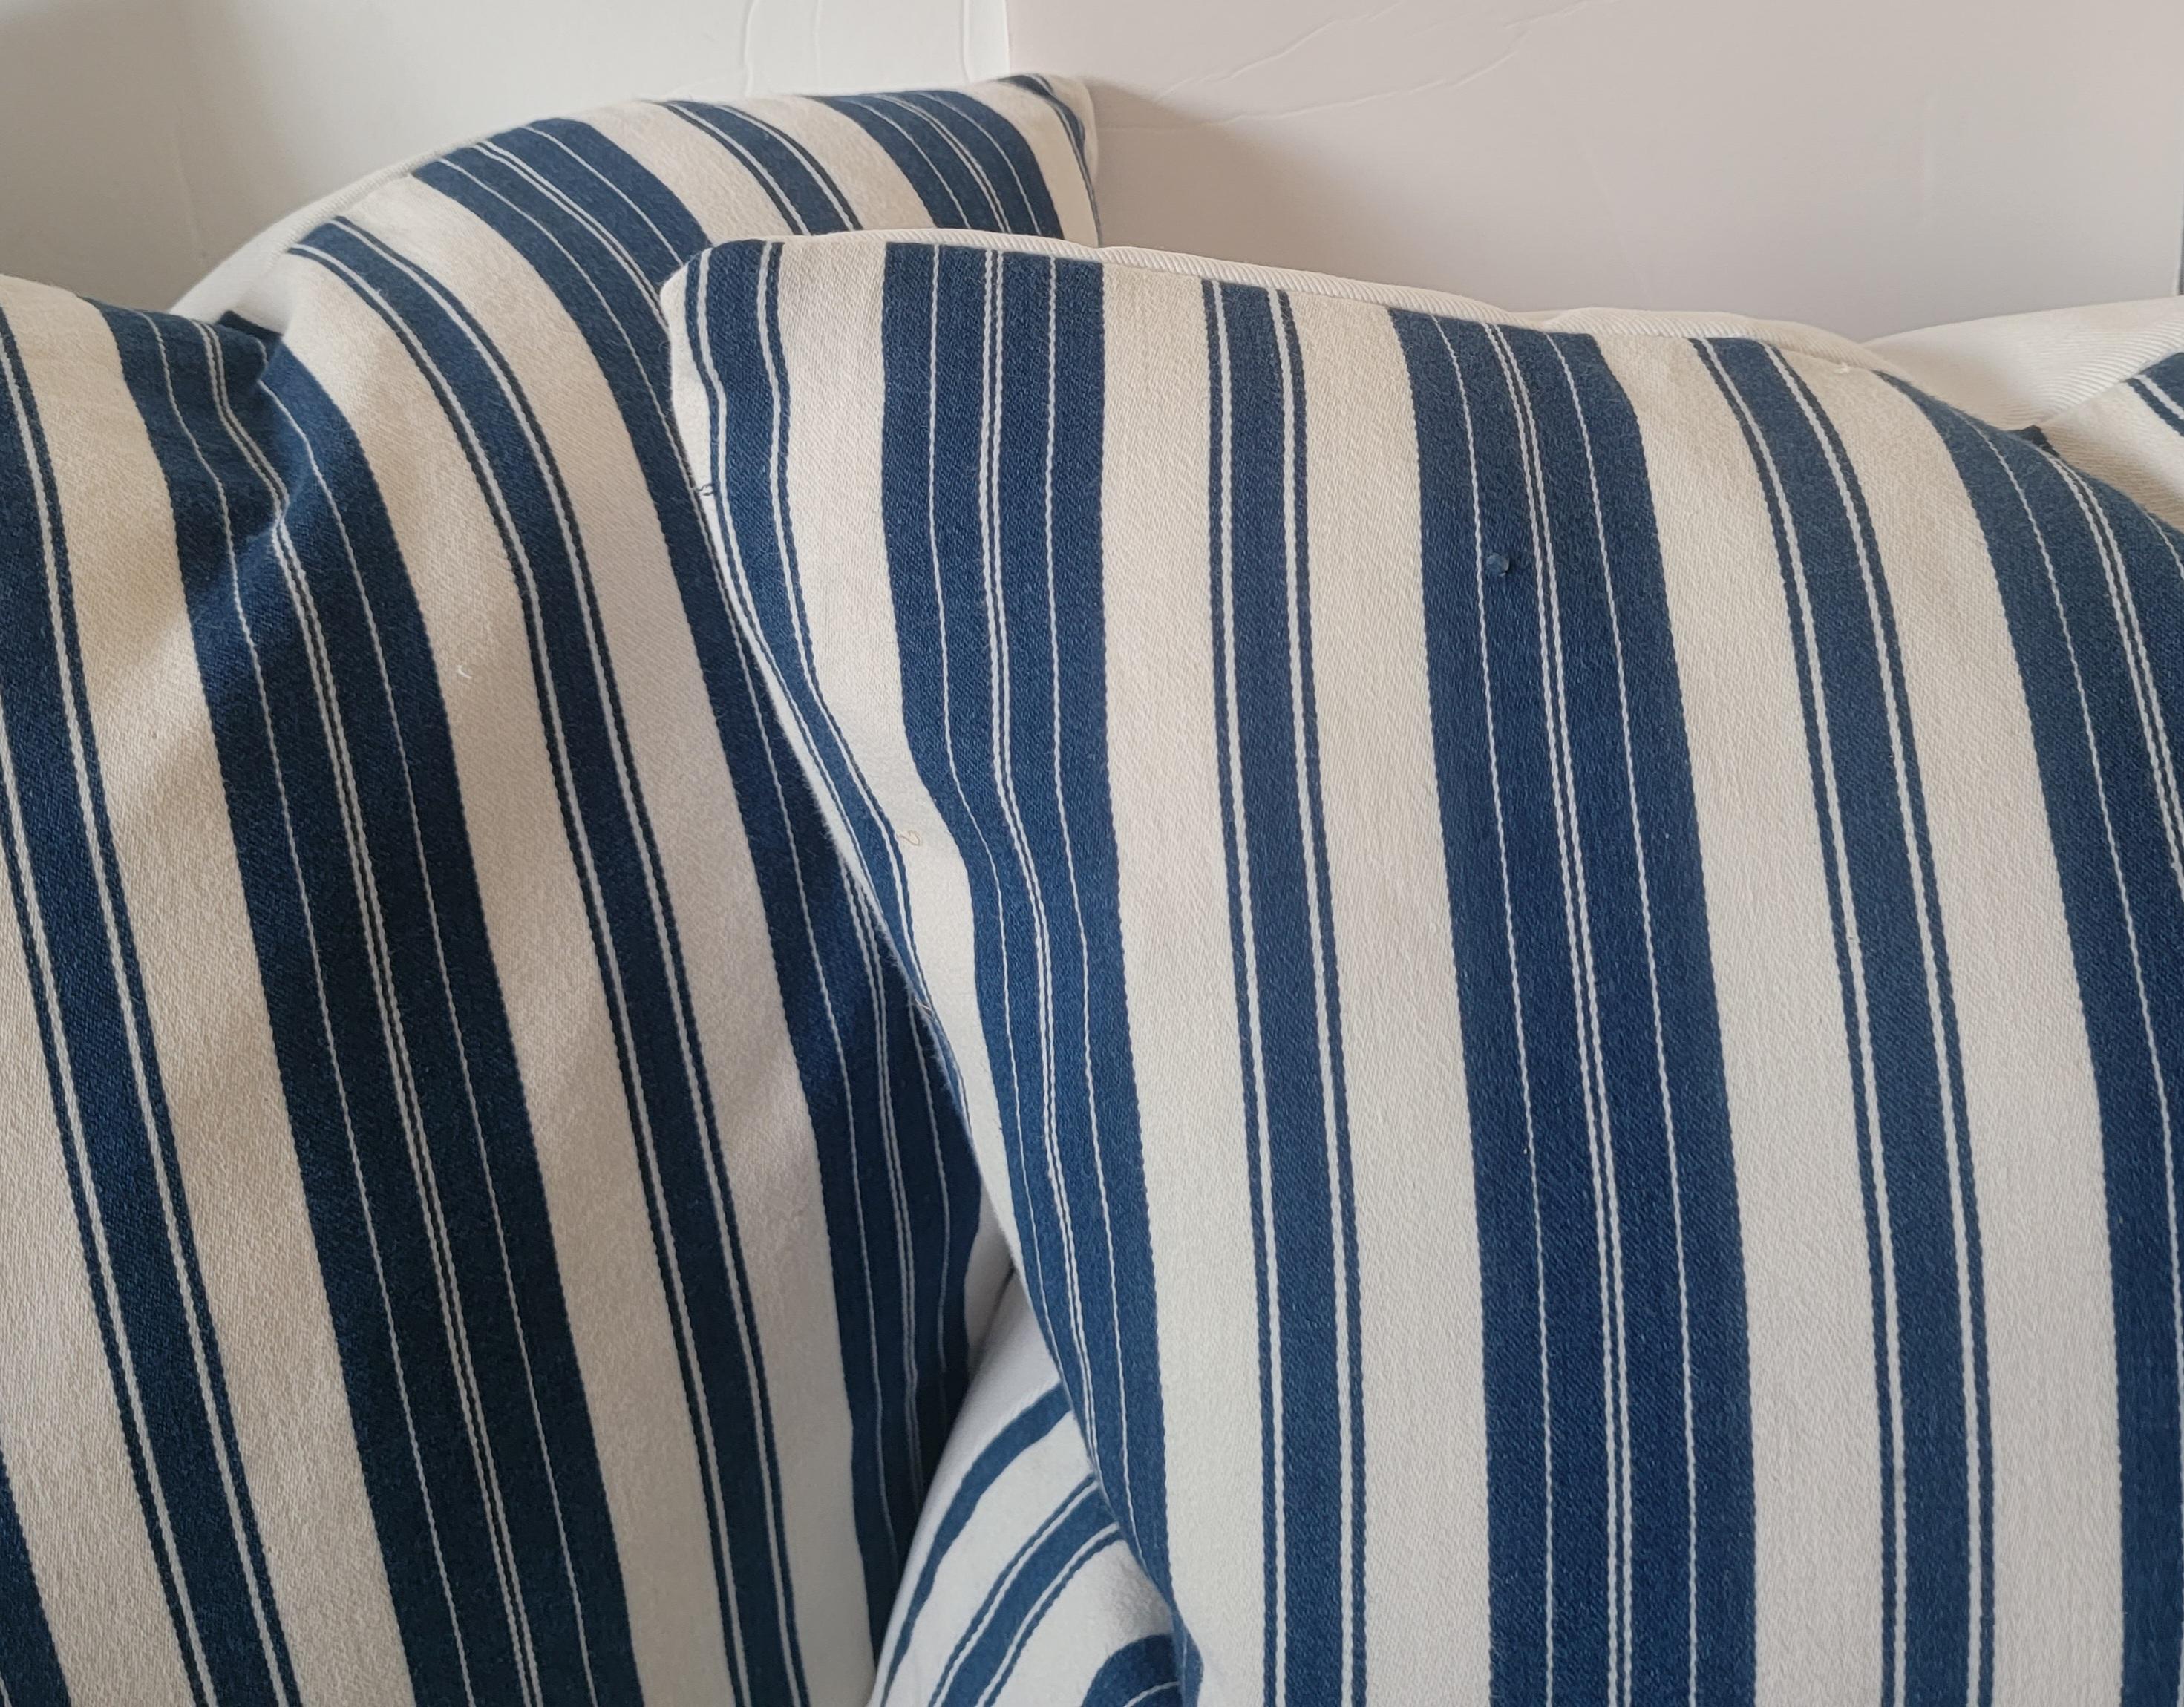 19th Century 19thc Blue and White Striped Ticking Pillows For Sale